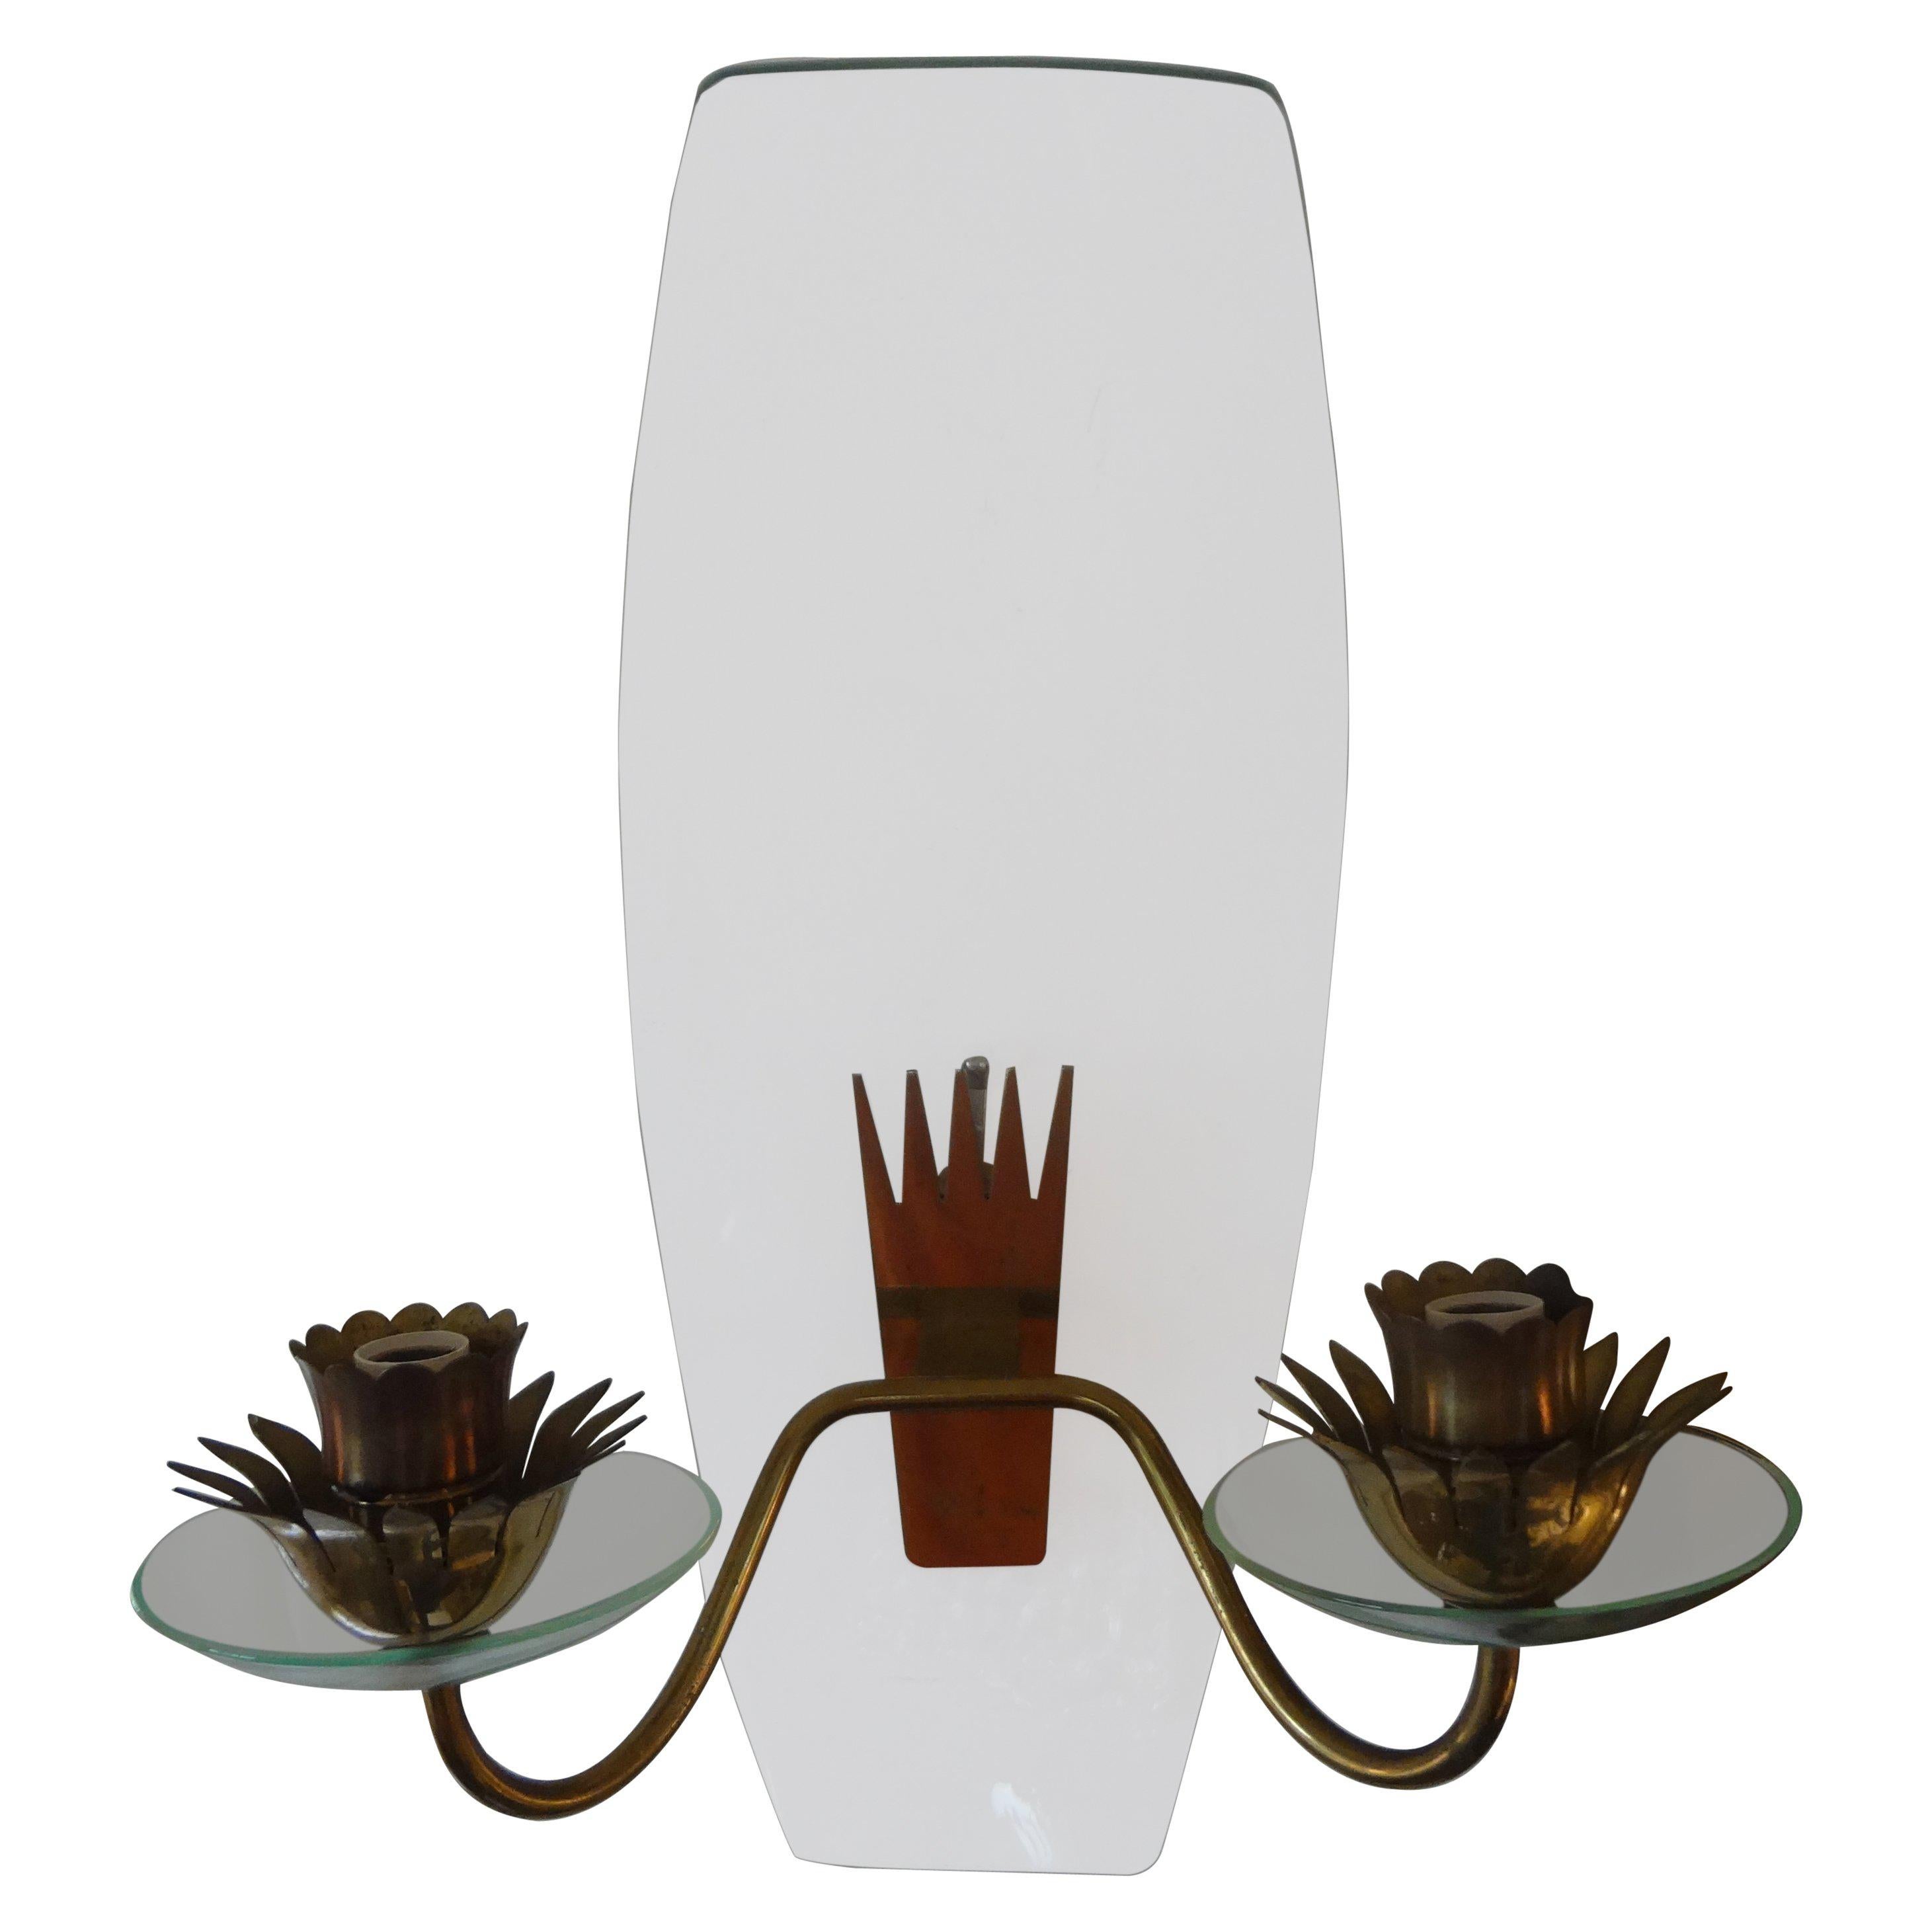 Stunning pair of Italian curved glass and bronze sconces attributed to Pietro Chiesa for Fontana Arte, circa 1940s.
This pair of Italian Mid-Century Modern sconces have been newly wired for the U.S. Market.